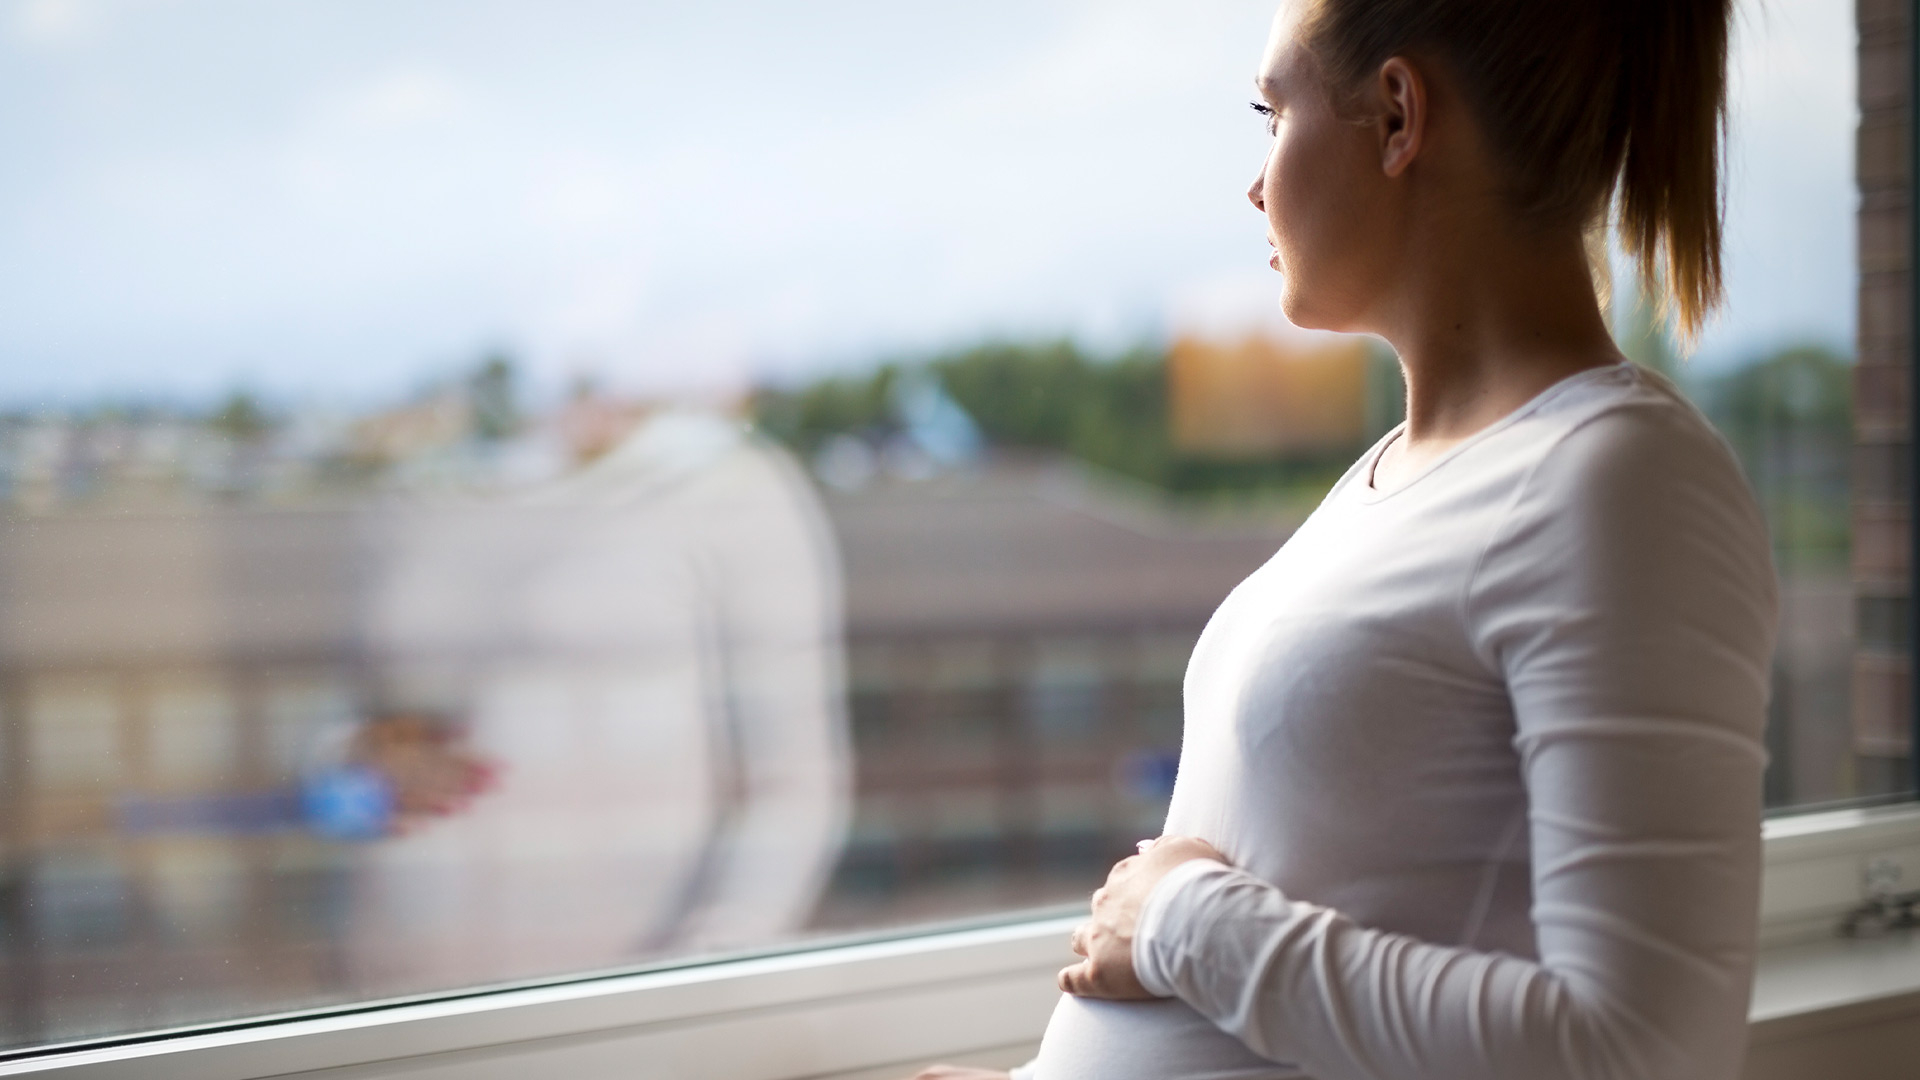 Thanks to the SUN Project, pregnant women with substance use disorders (or addiction) now have access to the prenatal care, behavioral health services and social support they need.